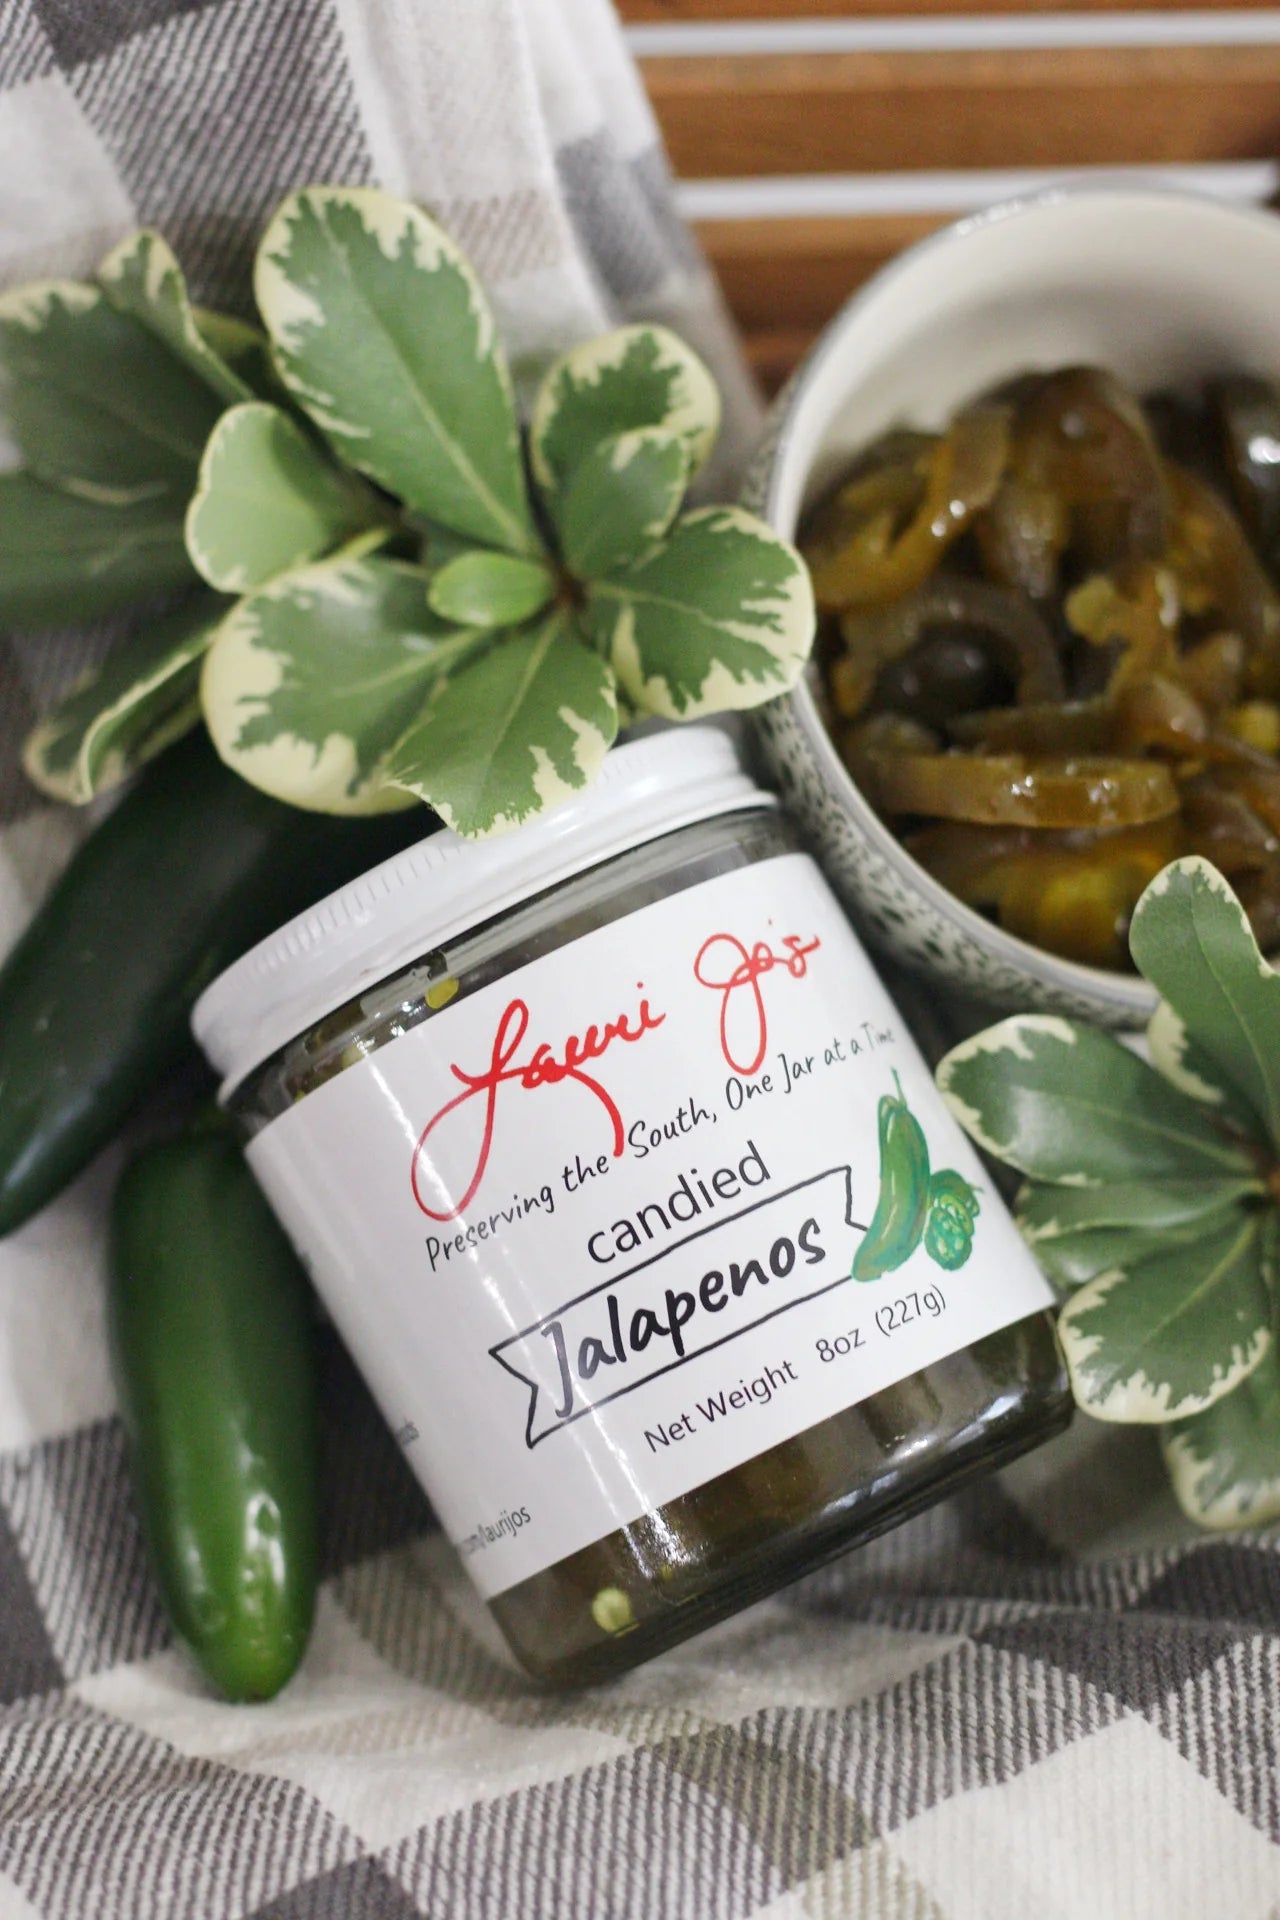 Lauri Jo's Candied Jalapenos